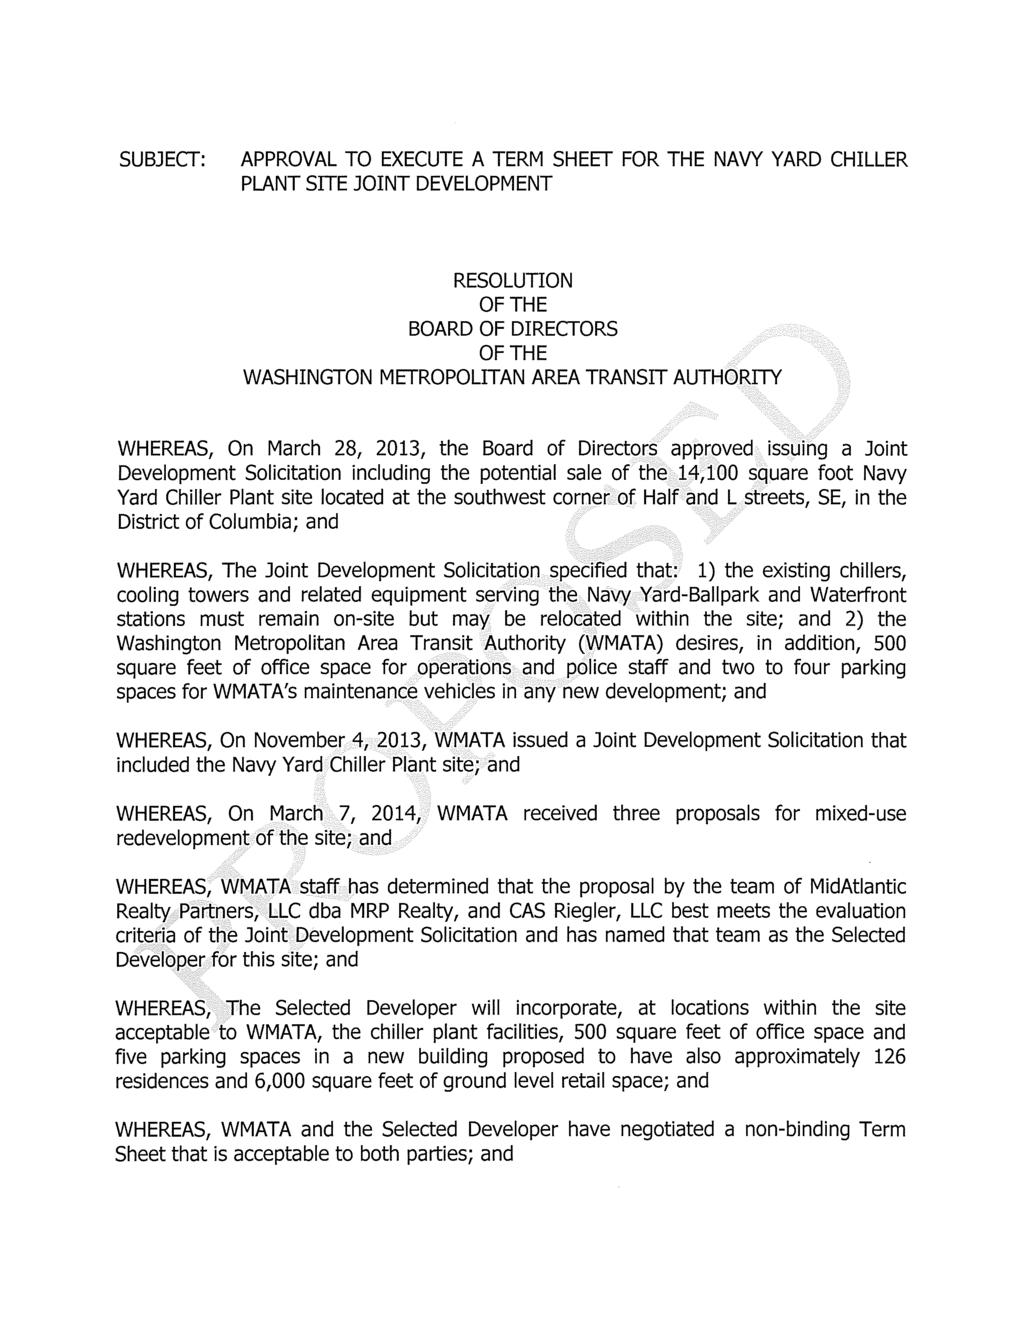 SUBJECT: APPROVAL TO EXECUTE A TERM SHEET FOR THE NAVY YARD CHILLER PLANT SITE JOINT DEVELOPMENT RESOLUTION OF THE BOARD OF DIRECTORS OF THE WASHINGTON METROPOLITAN AREA TRANSIT AUTHORITY WHEREAS, On